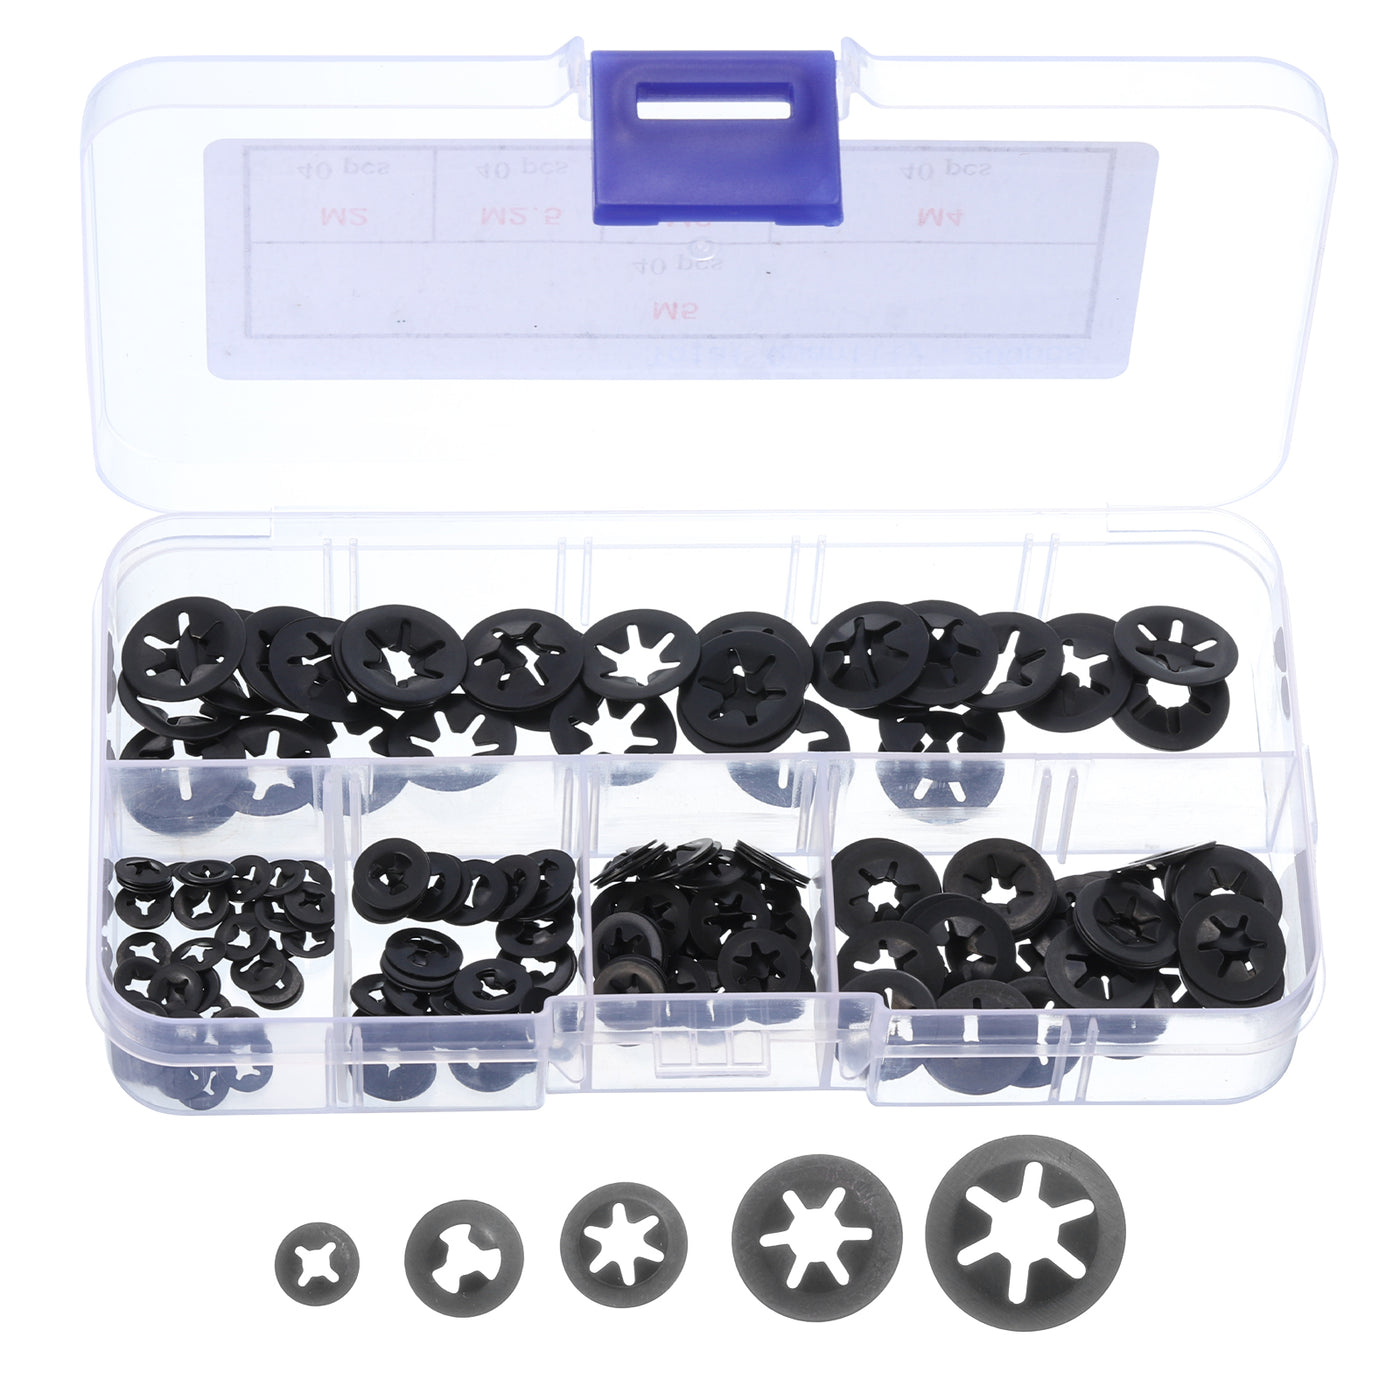 uxcell Uxcell 200pcs Internal Tooth Star Lock Washers M2 M2.5 M3 M4 M5, 65Mn Steel Push Nuts